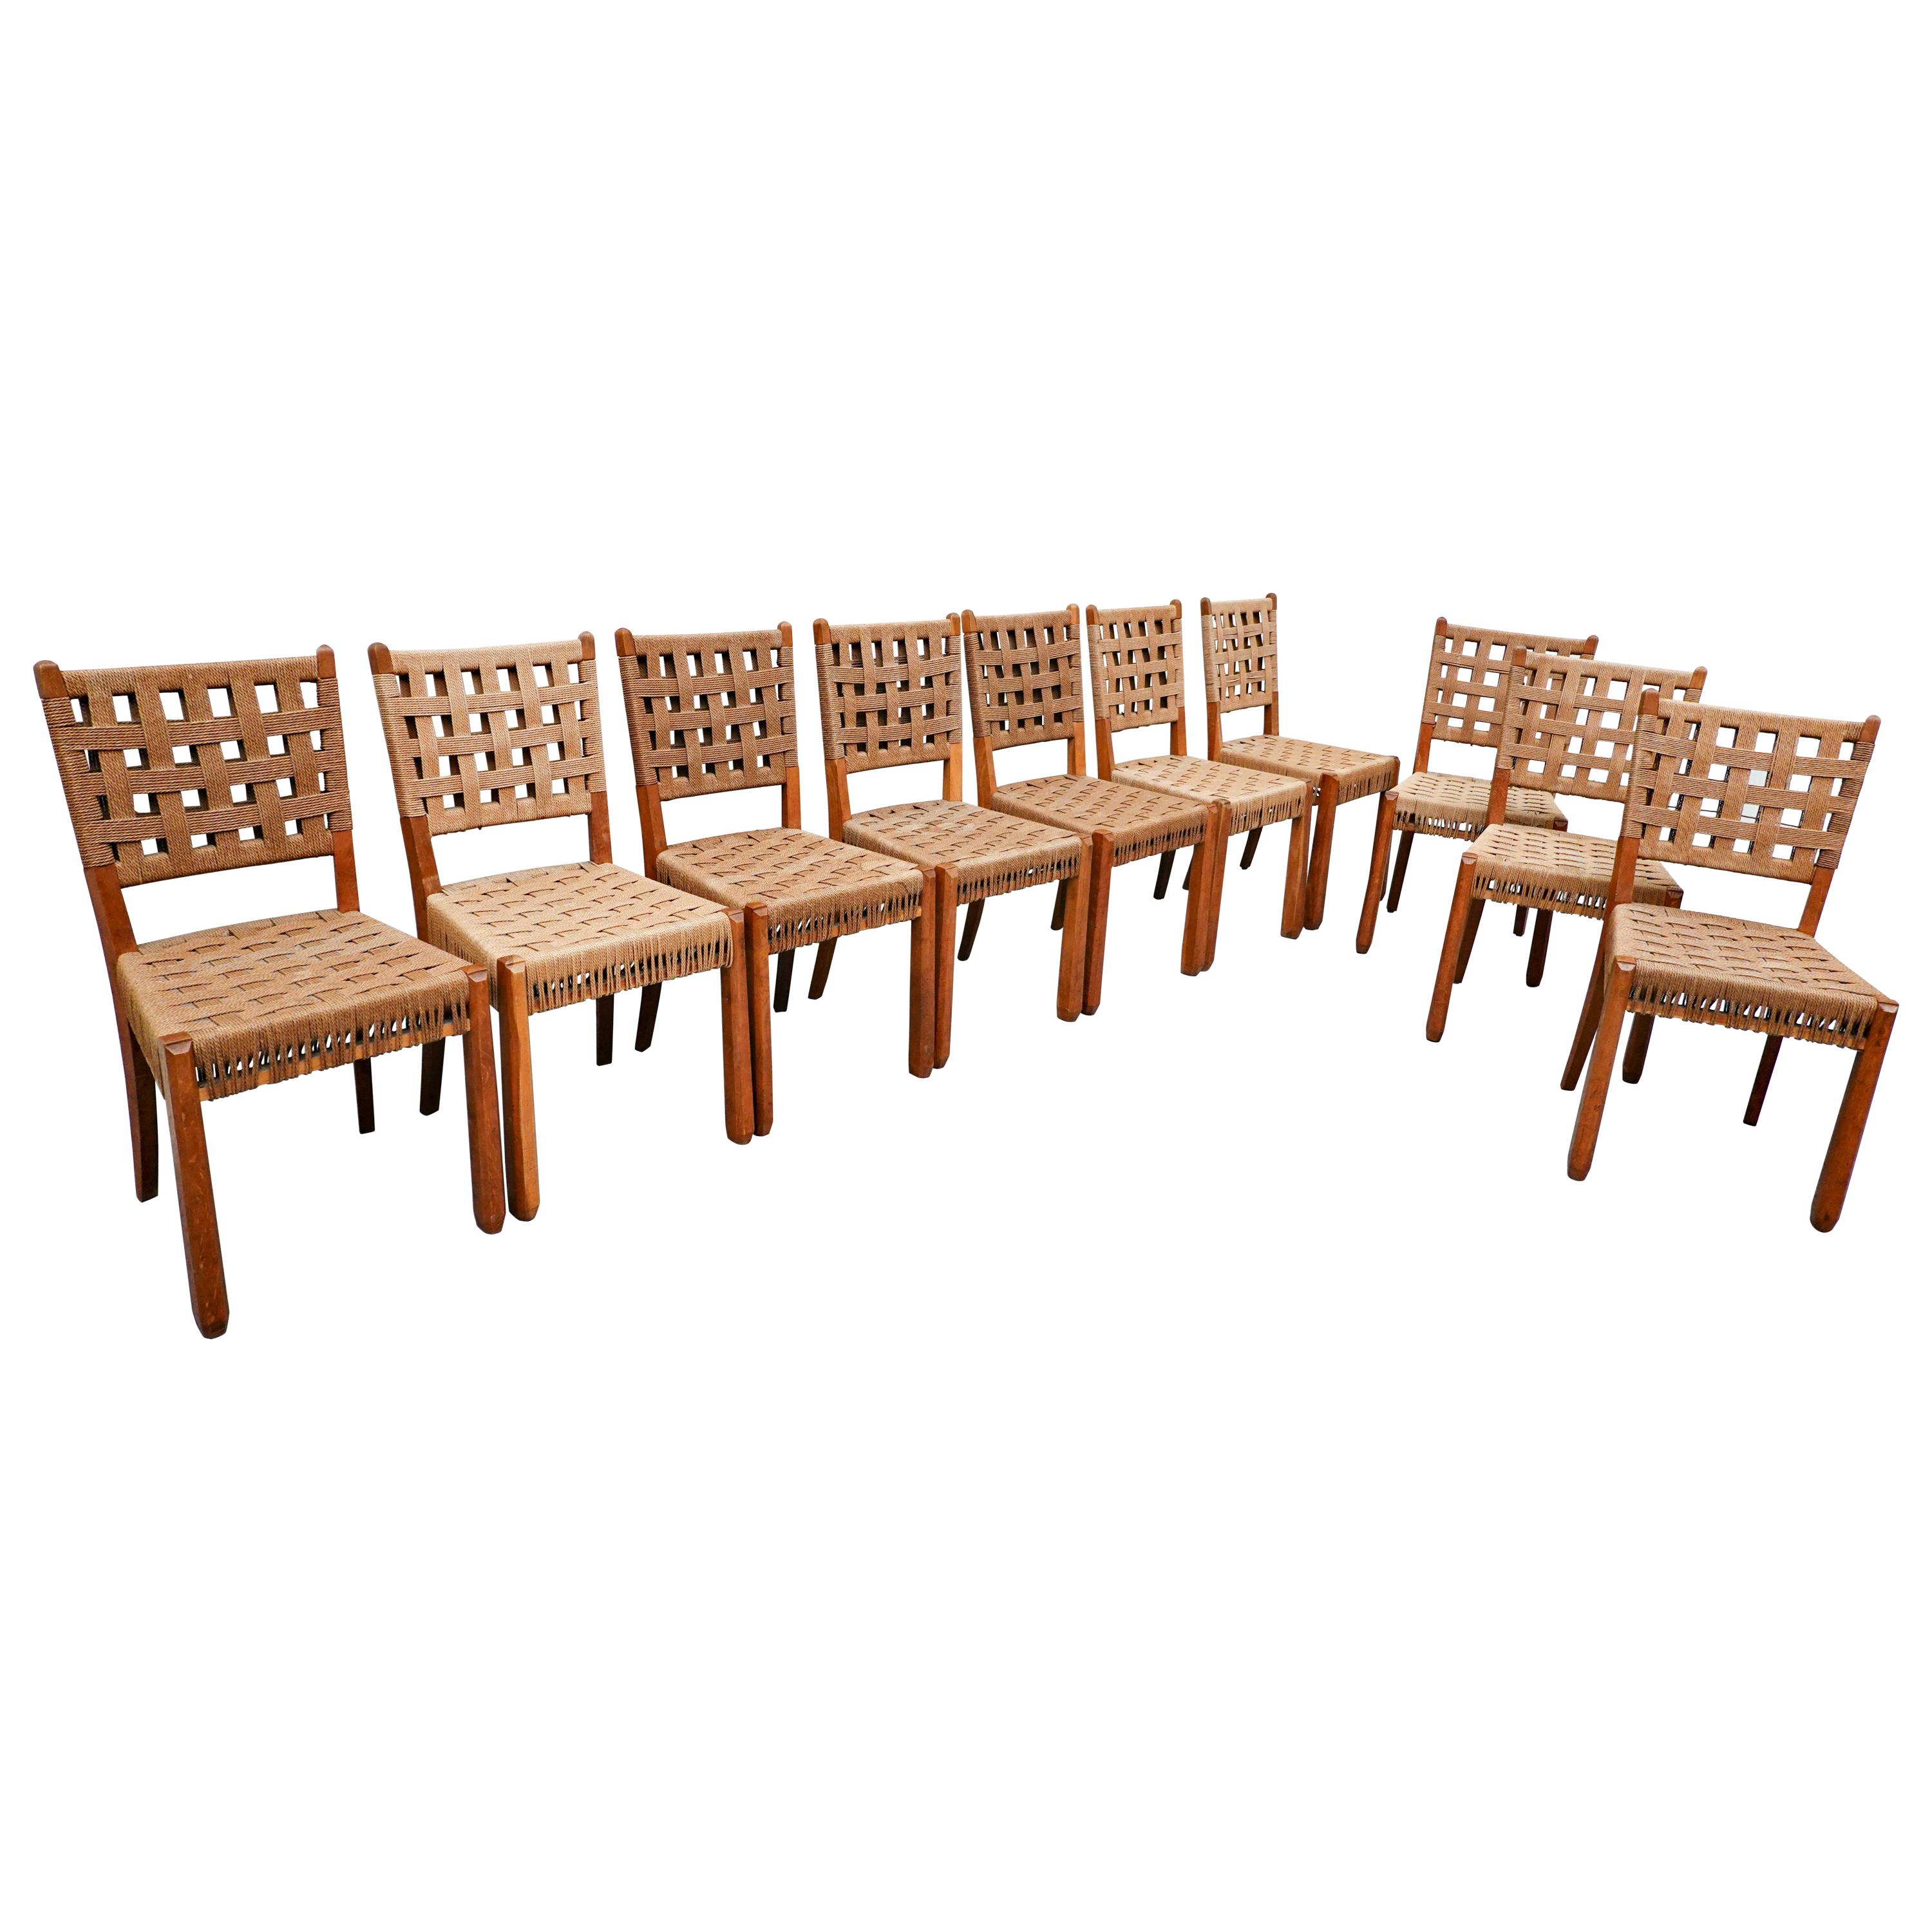 Set of 10 Mid-Century Modern Oak and Rope Chairs, 1940s